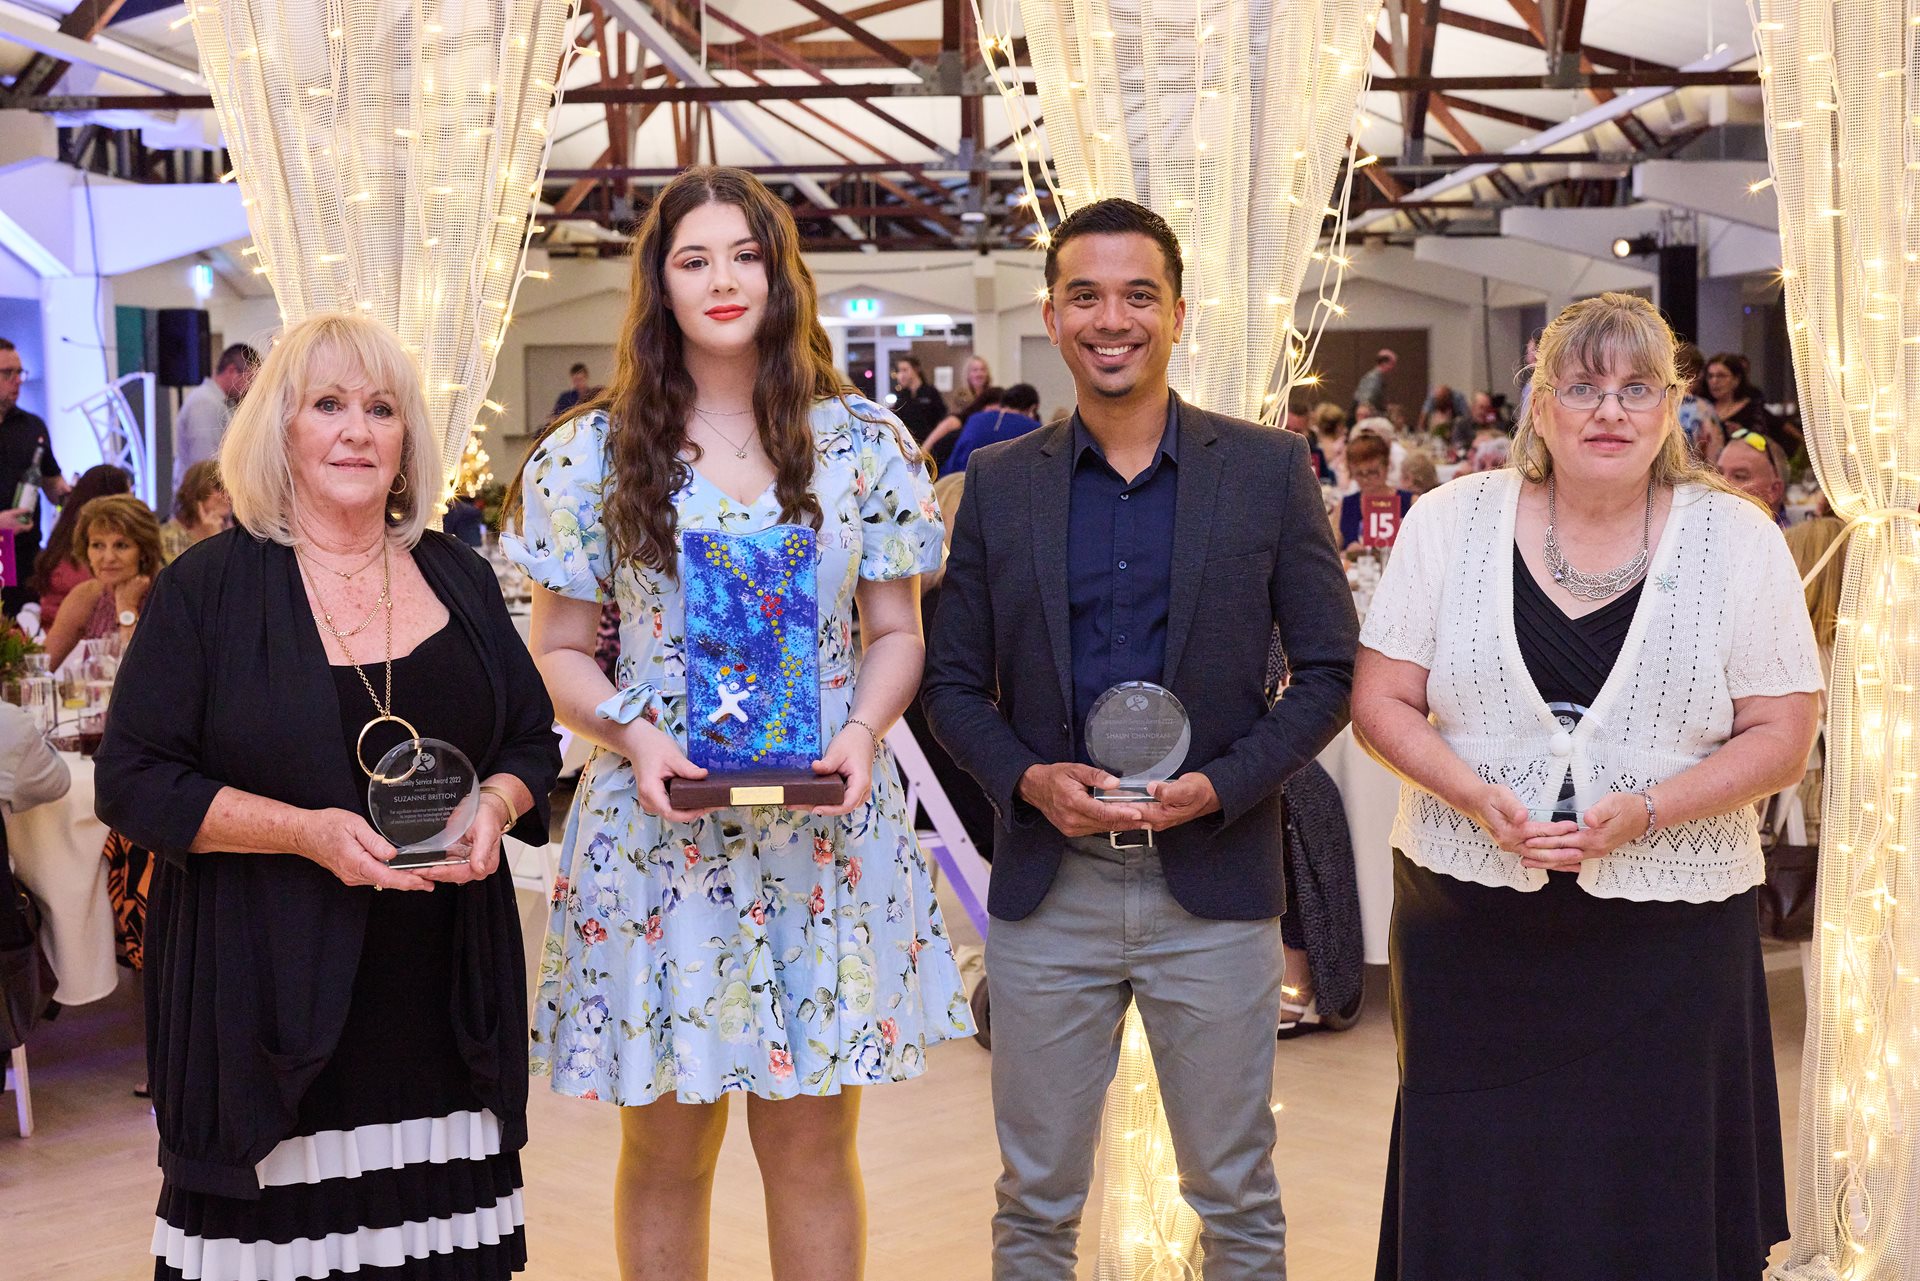 2022 Community Service Award winners holding their awards at the Civic Dinner in the Glasshouse